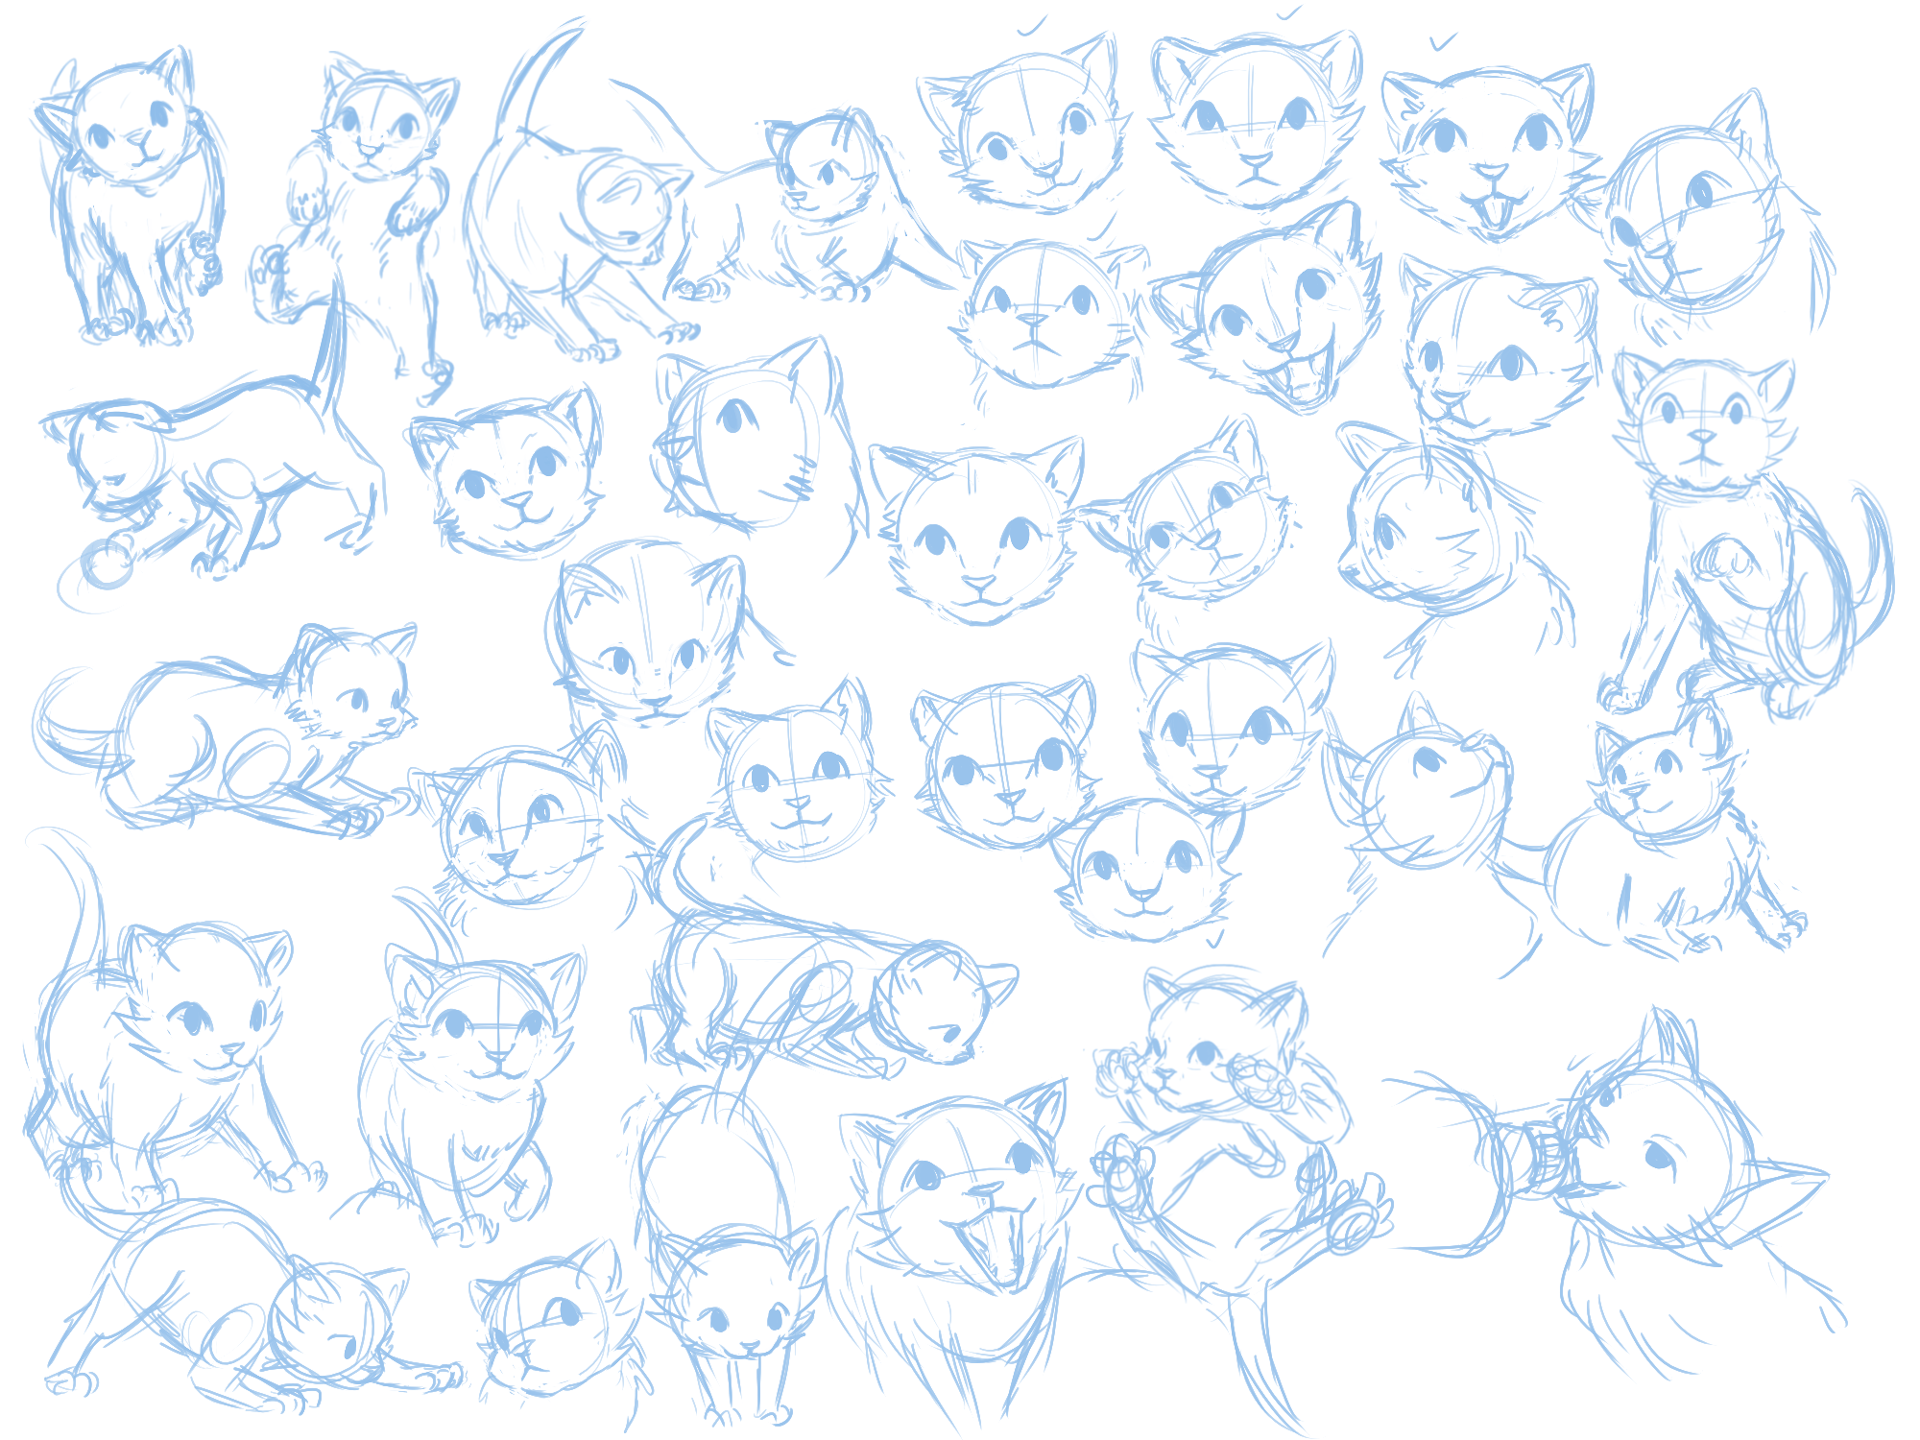 Initial sketches for Little Sister Kitty's character